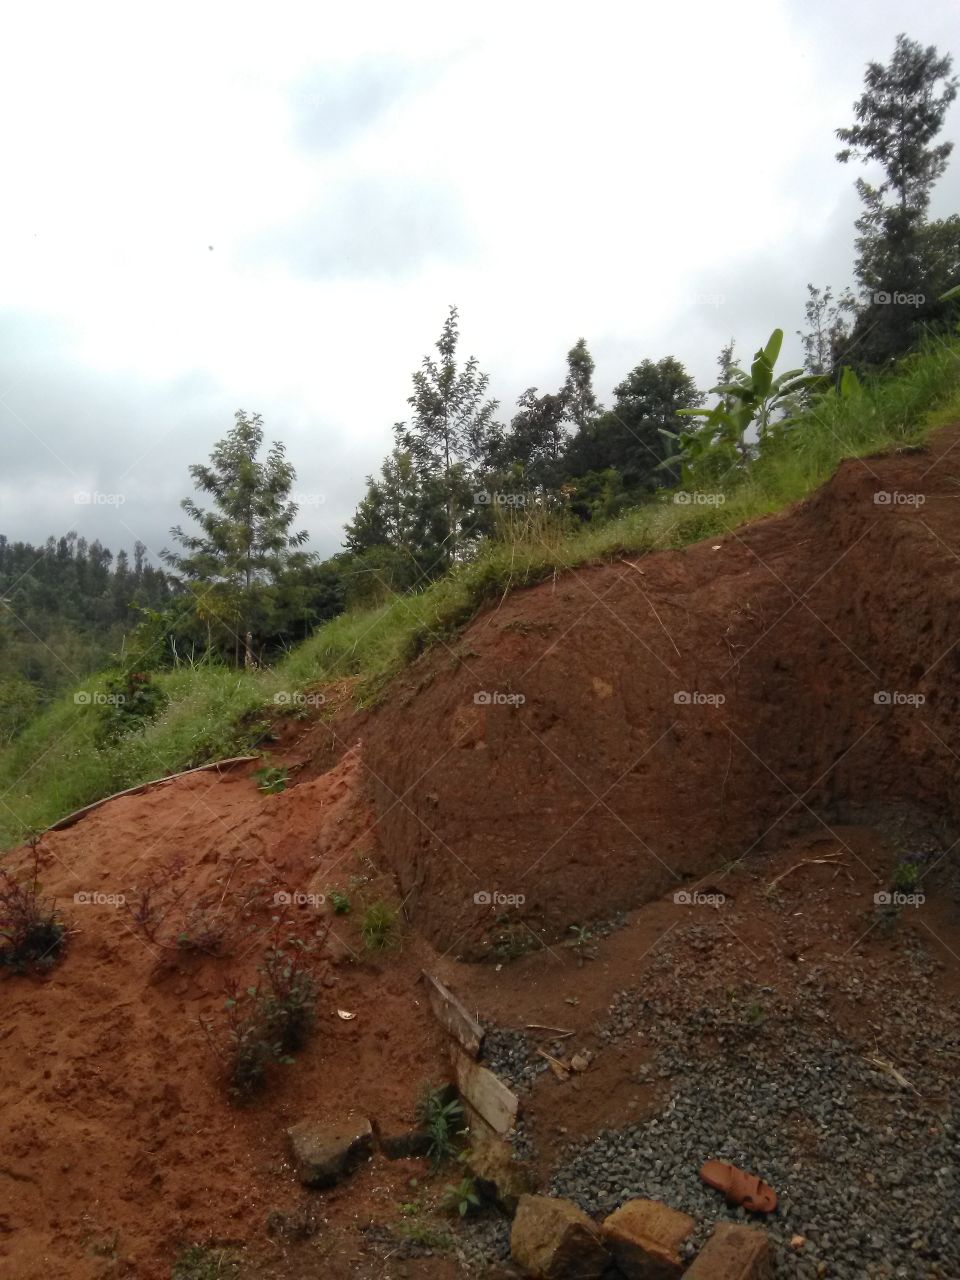 This photo illustrates one of the Kenyan hilly and foggy highlands oftenly prone to landslides.